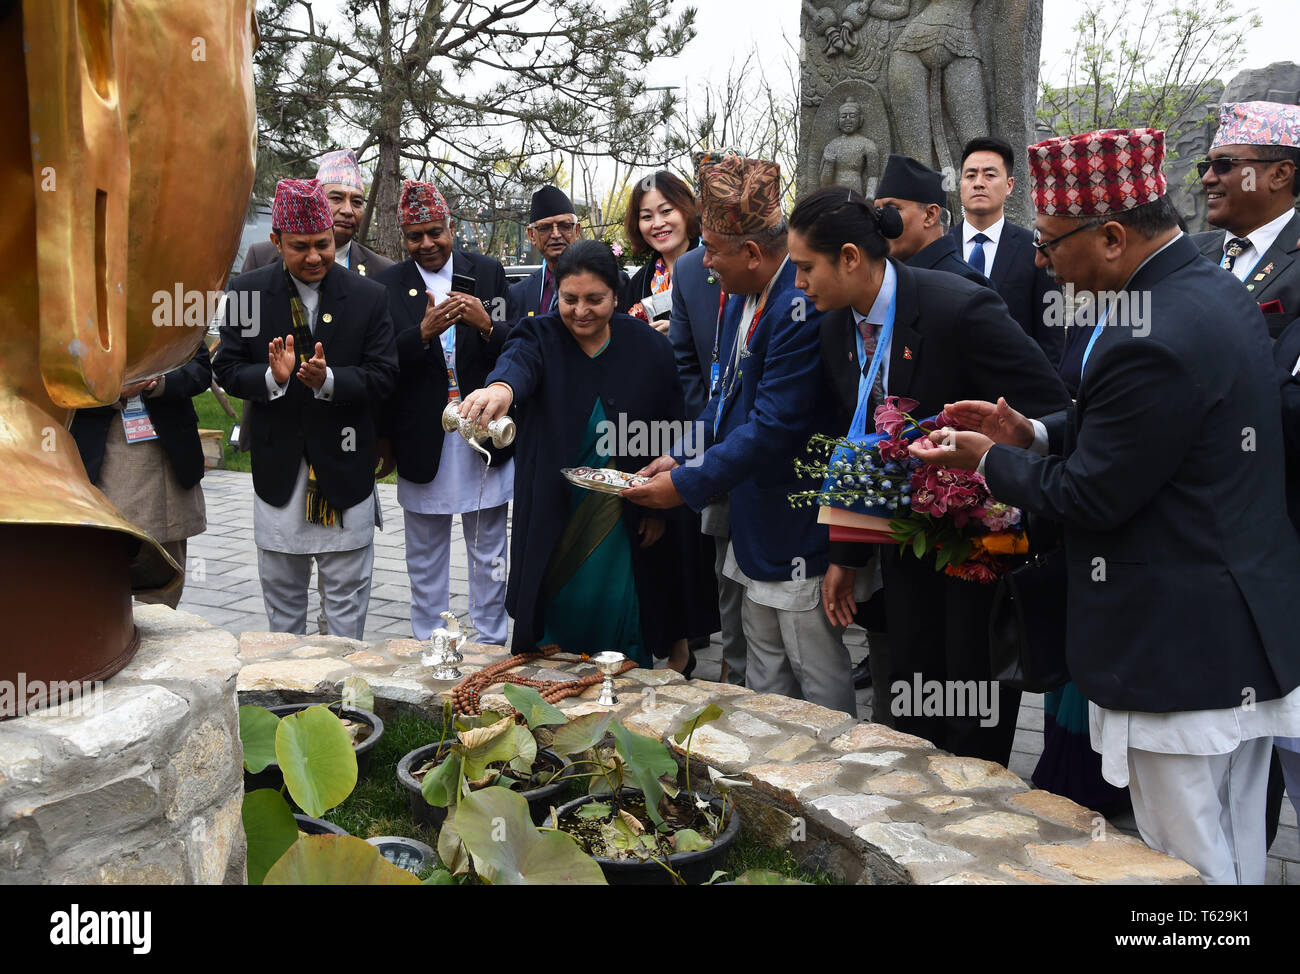 Beijing, China. 28th Apr, 2019. Nepalese President Bidhya Devi Bhandari visits the Nepal Garden at the International Horticulture zone of the International Horticultural Exhibition 2019 Beijing, in Beijing, capital of China, April 28, 2019. Credit: Ren Chao/Xinhua/Alamy Live News Stock Photo